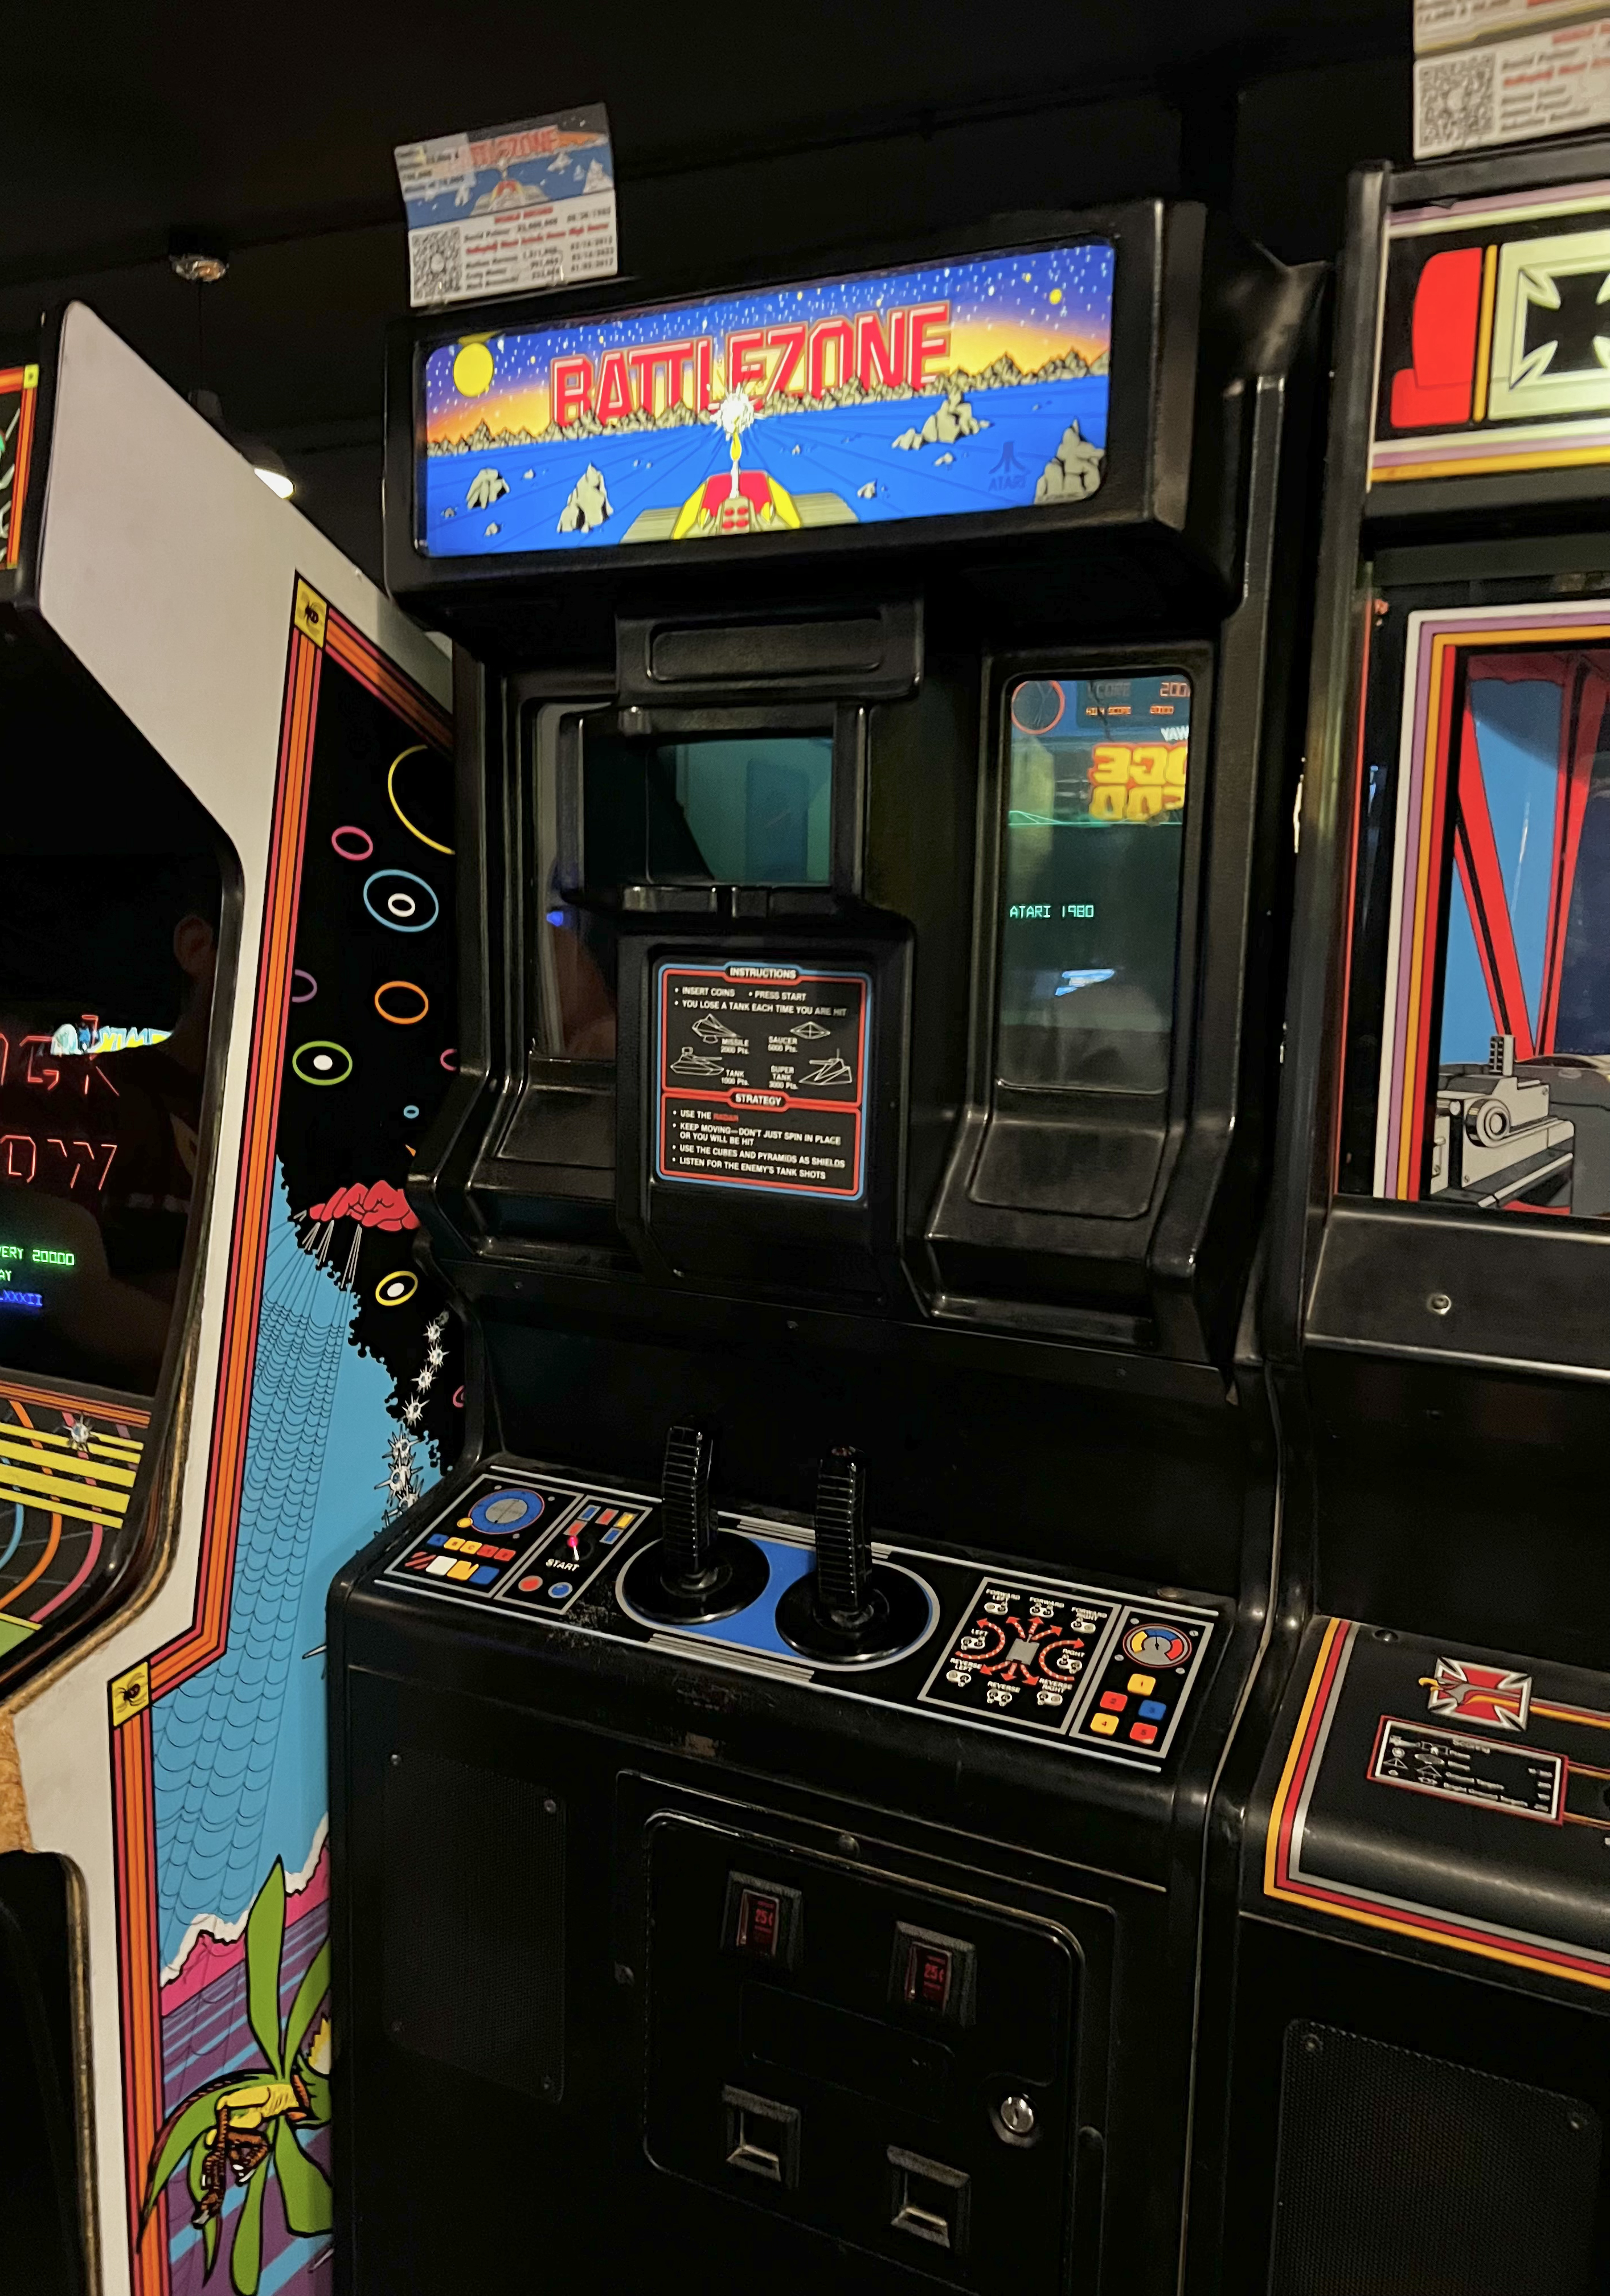 Battlezone Arcade Cabinet at Galloping Ghost